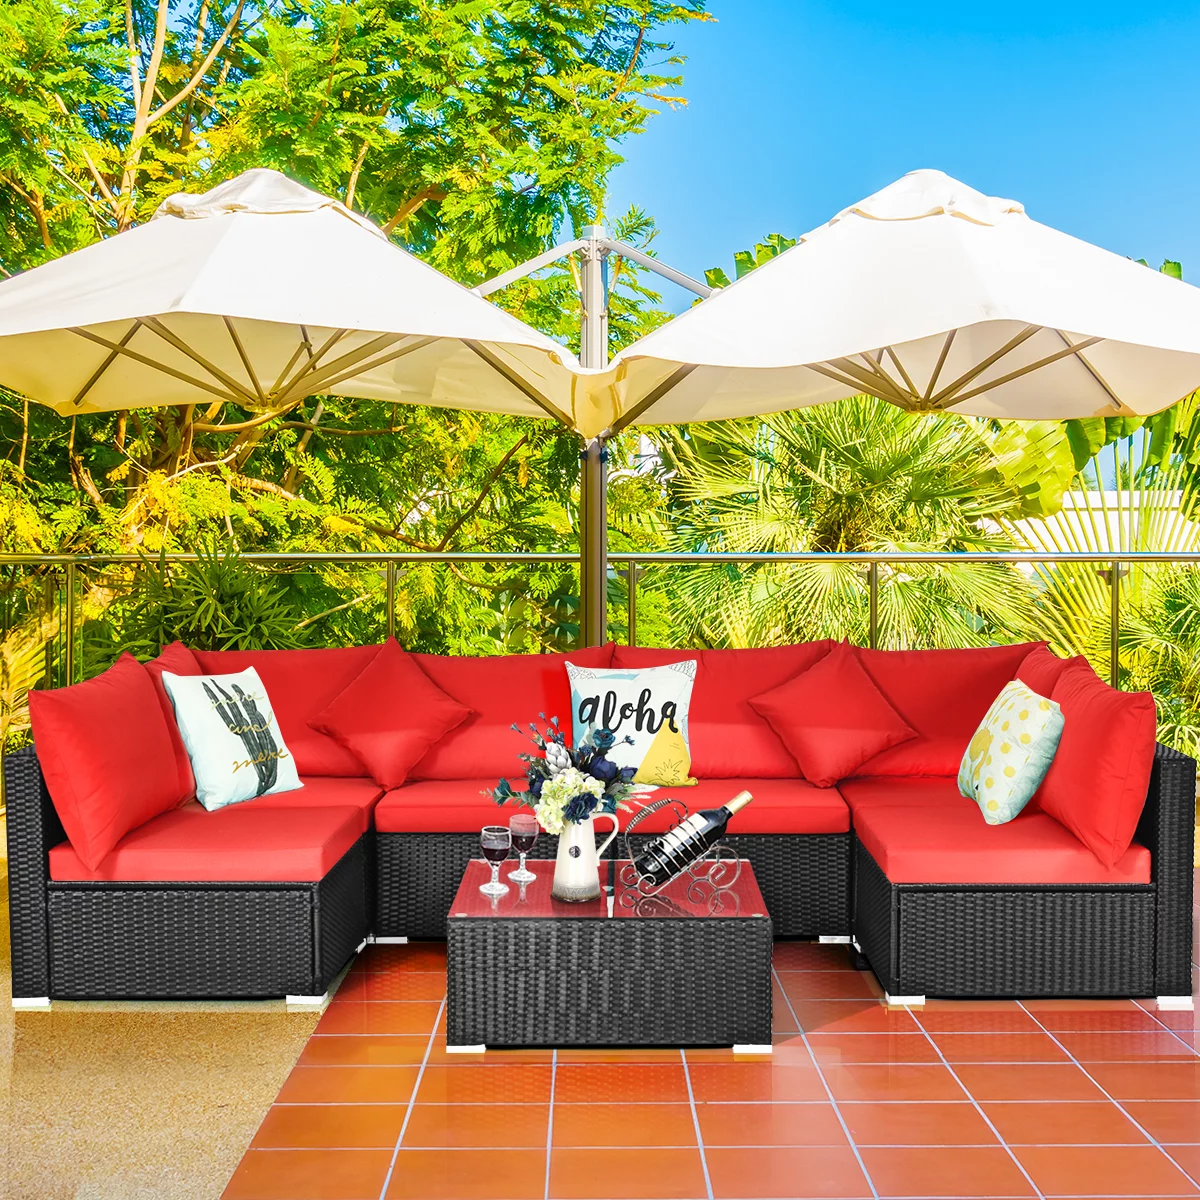 How do outdoor sofa sets match different outdoor styles?